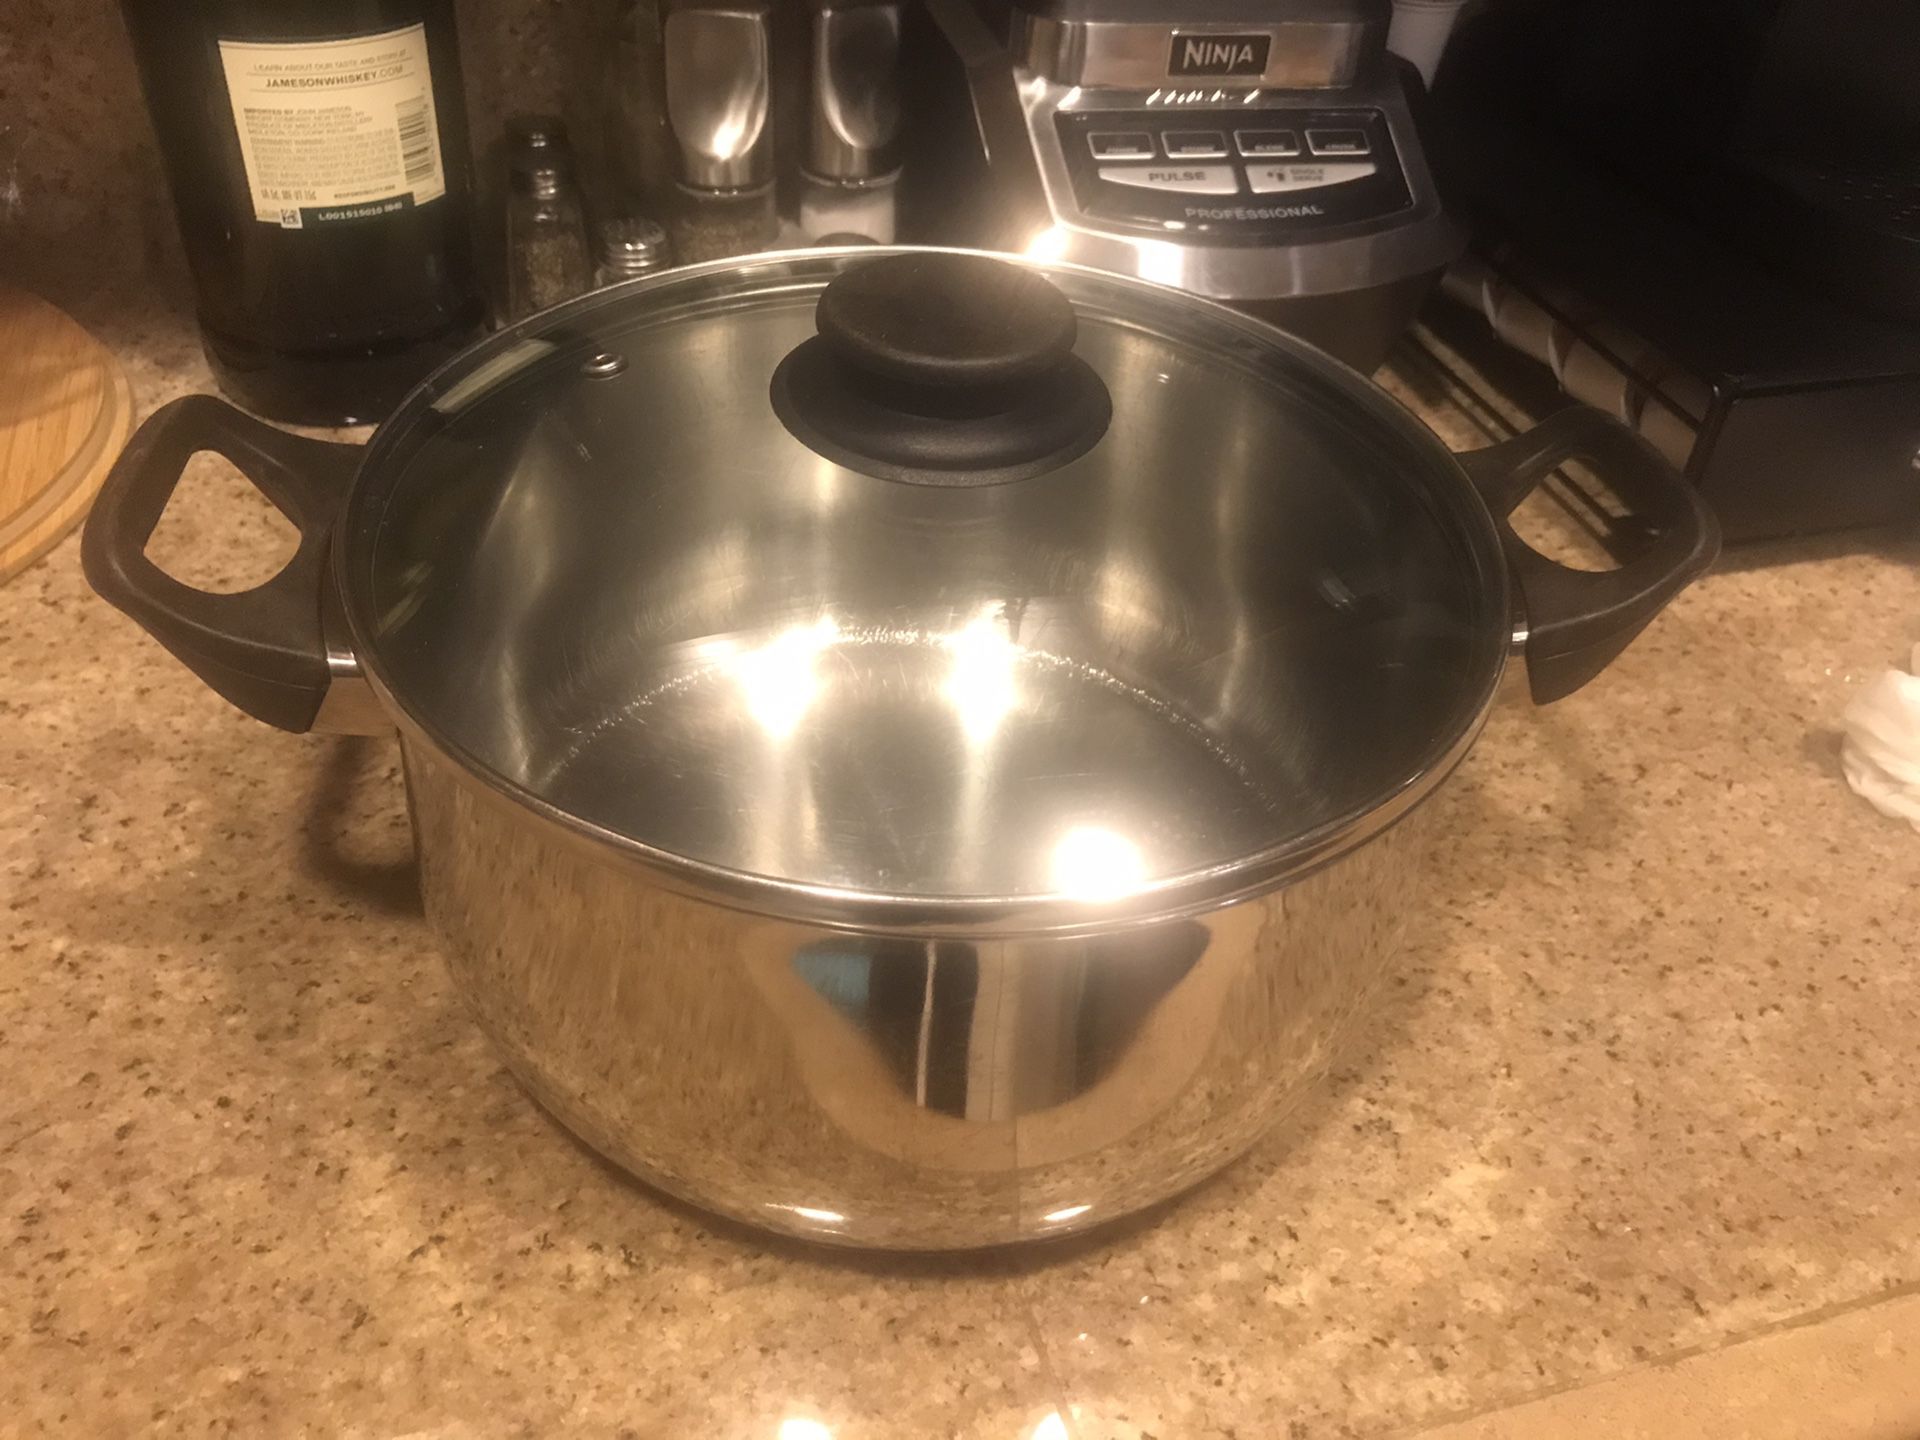 Stainless Steel Stock Pot and Pan w/Lid